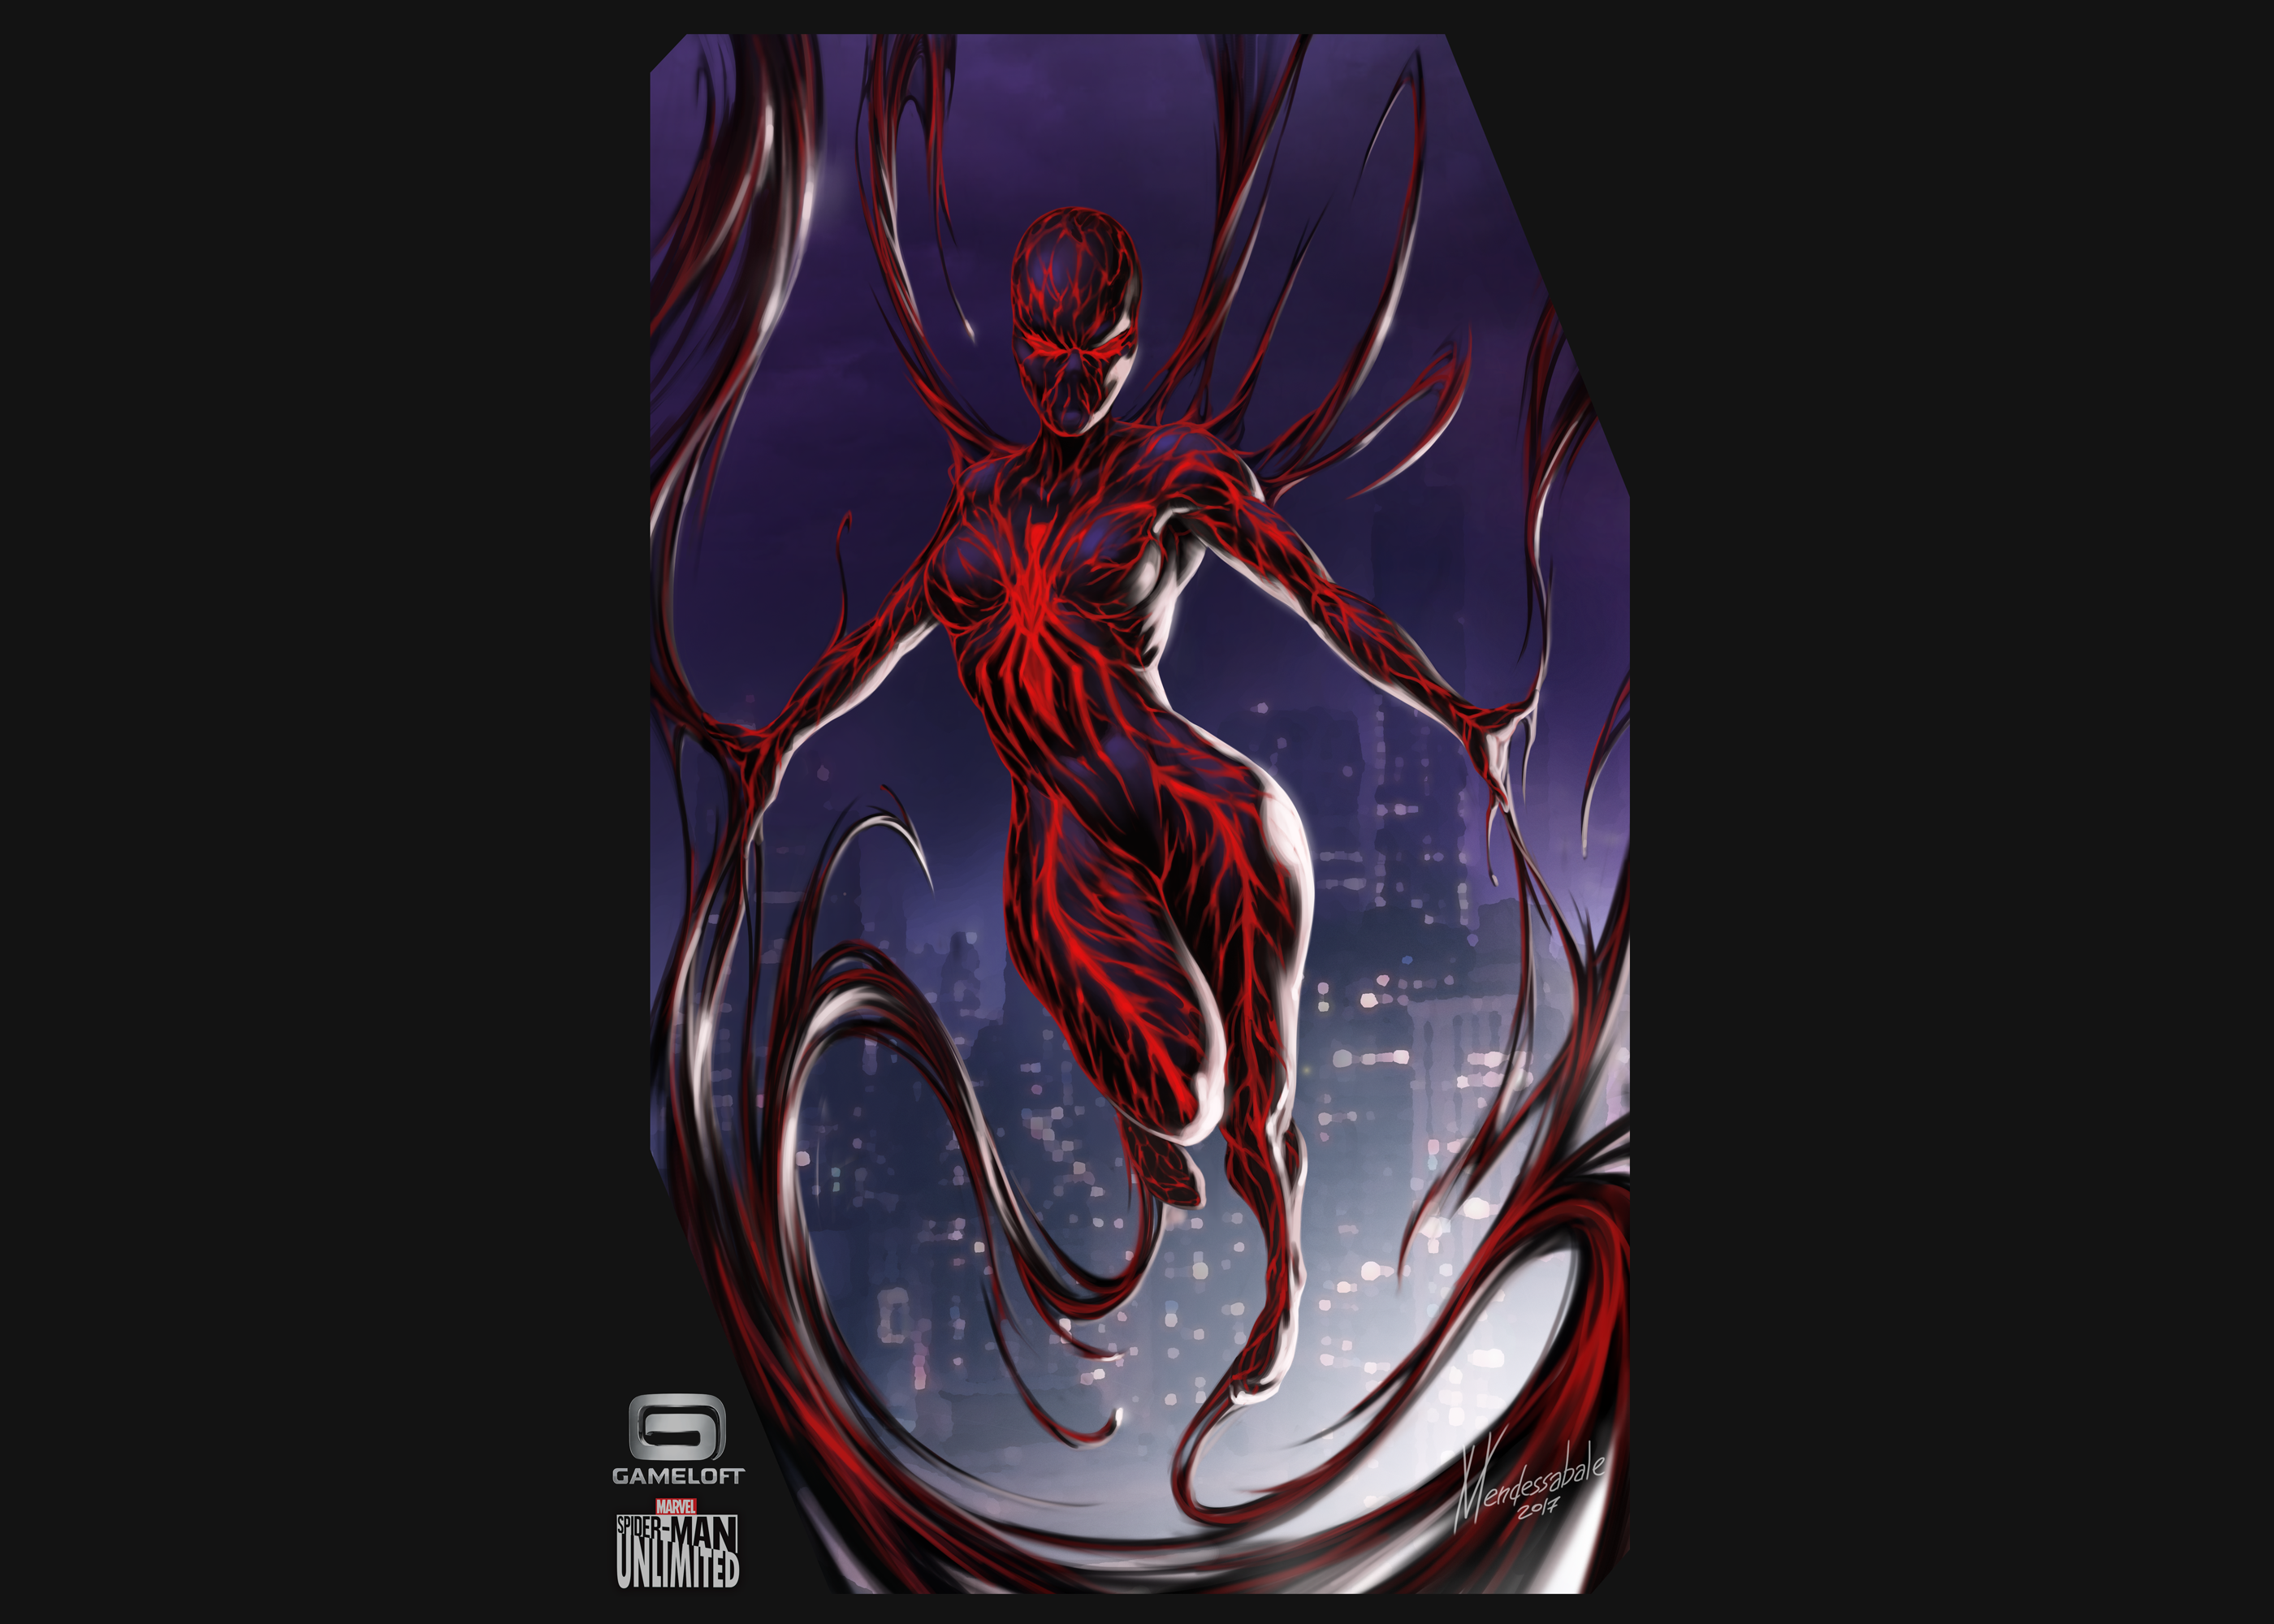 May Parker - Earth-9997 Spider-man Unlimited game card. 